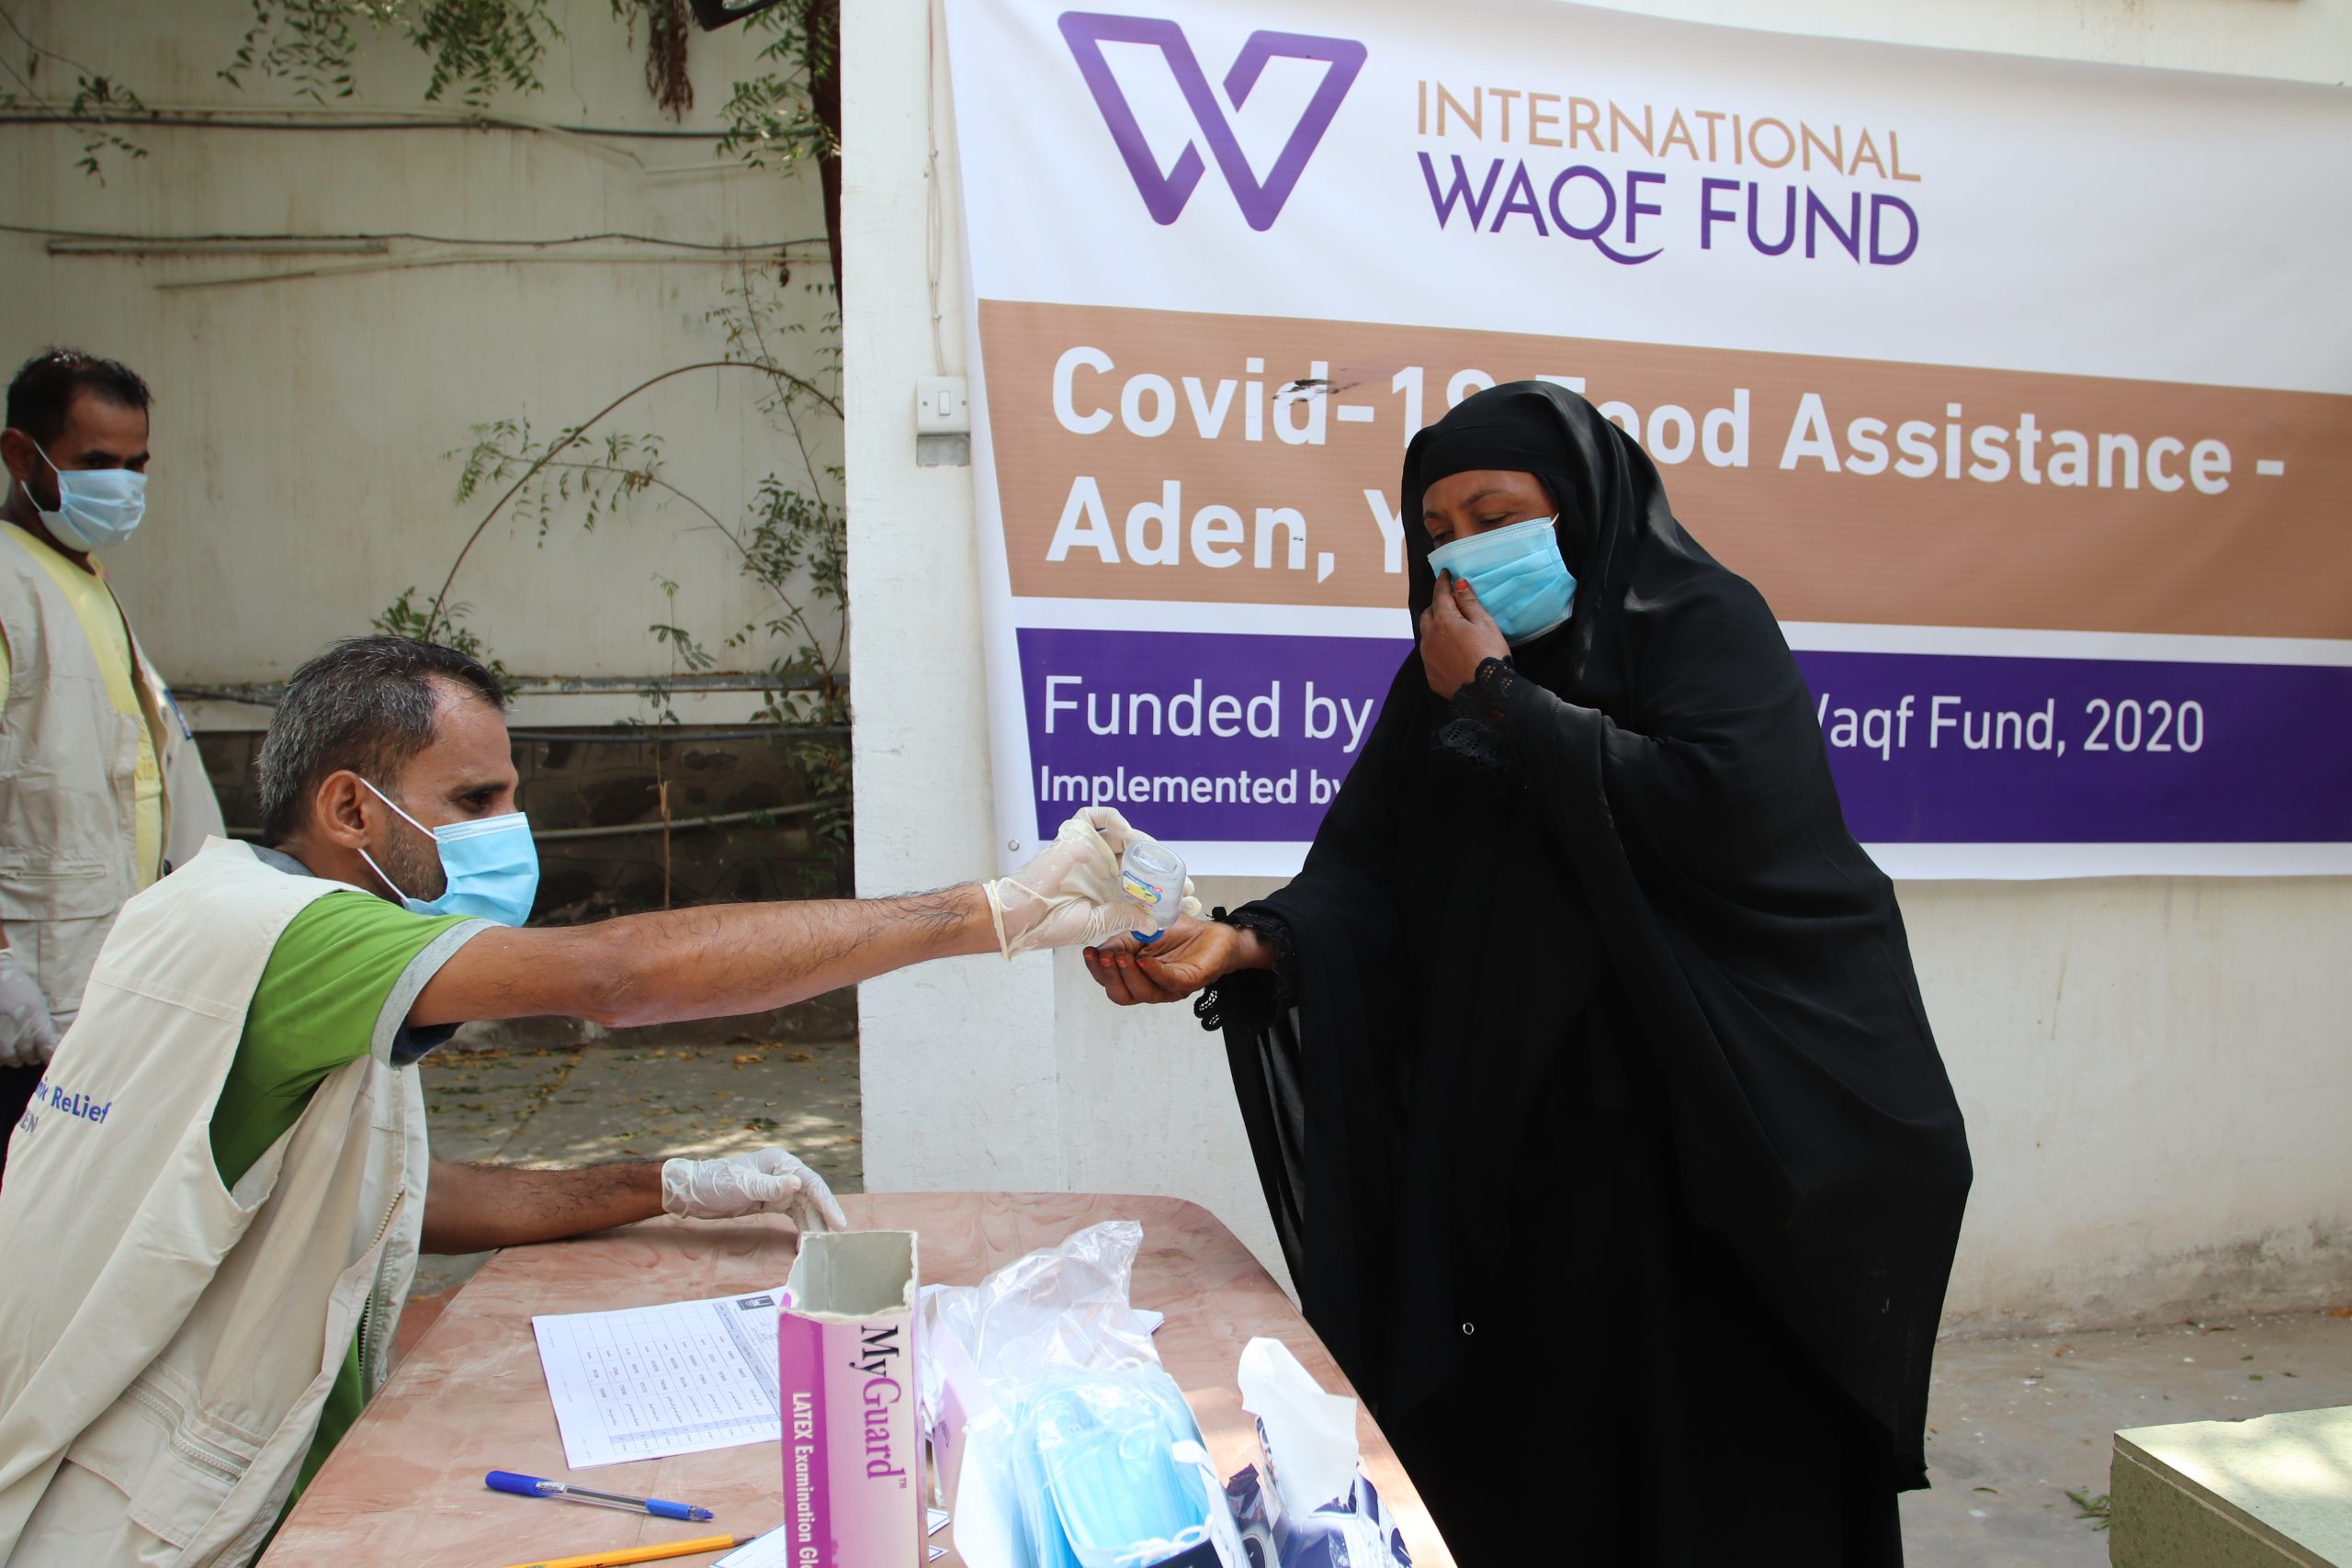 charity giving sites - Waqf looking for donors and sponsors